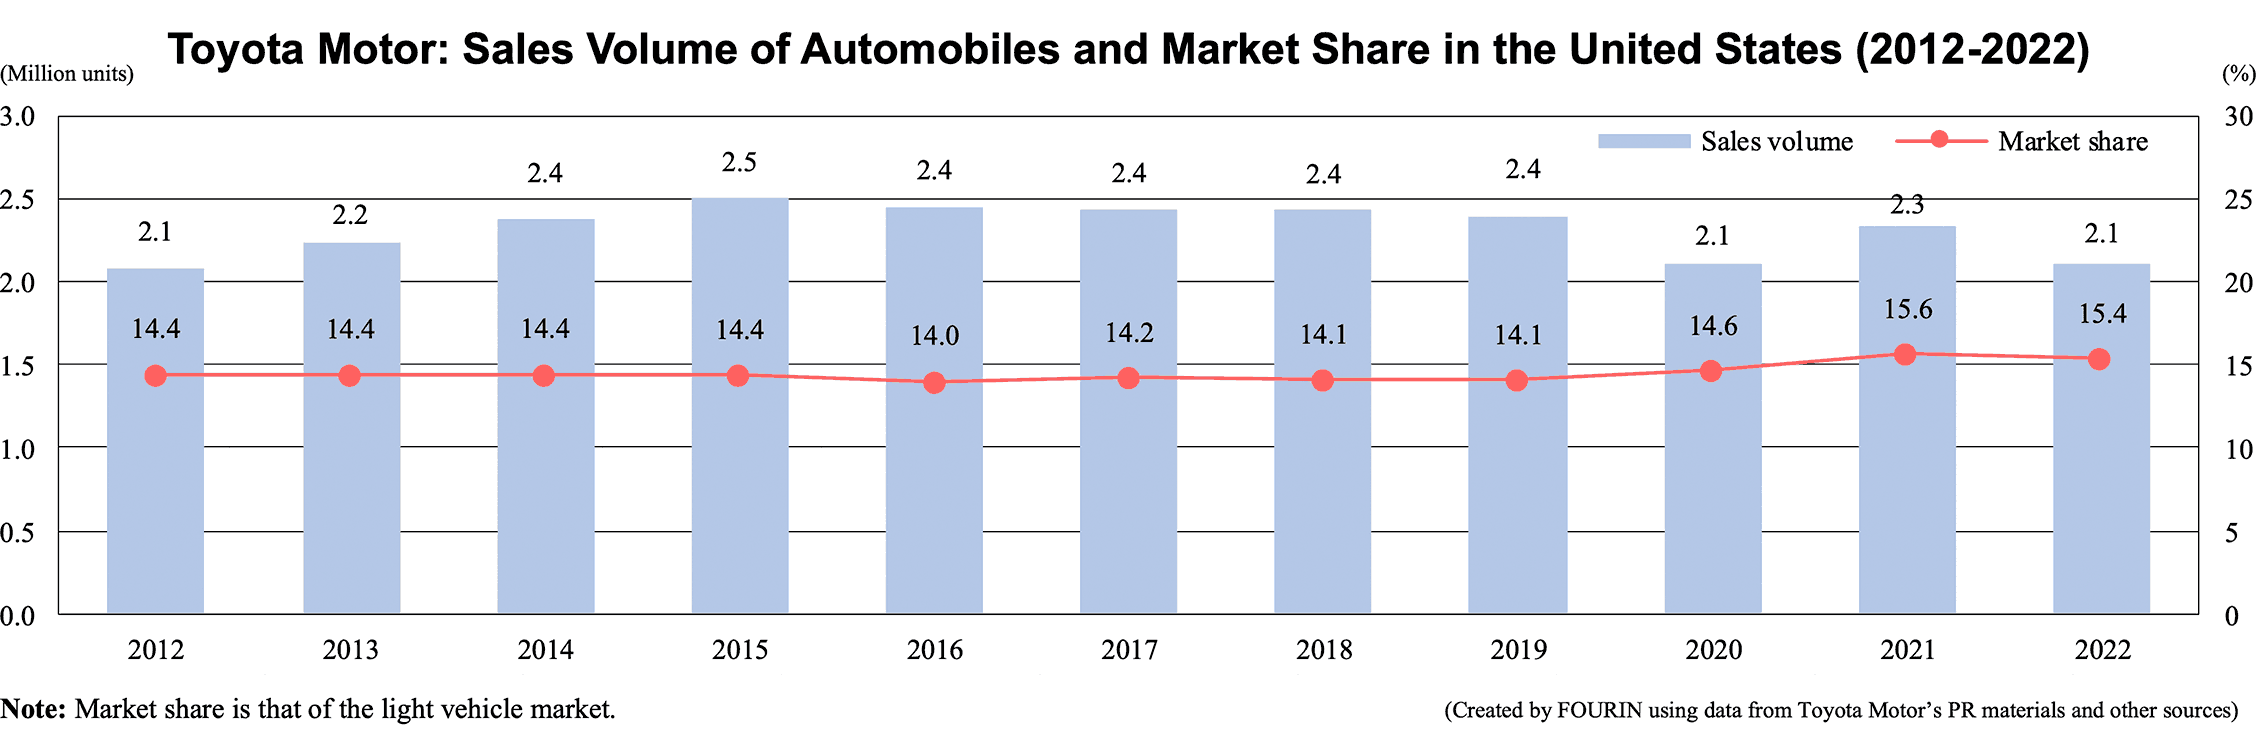 Toyota Motor: Sales Volume of Automobiles and Market Share in the United States (2012-2022)